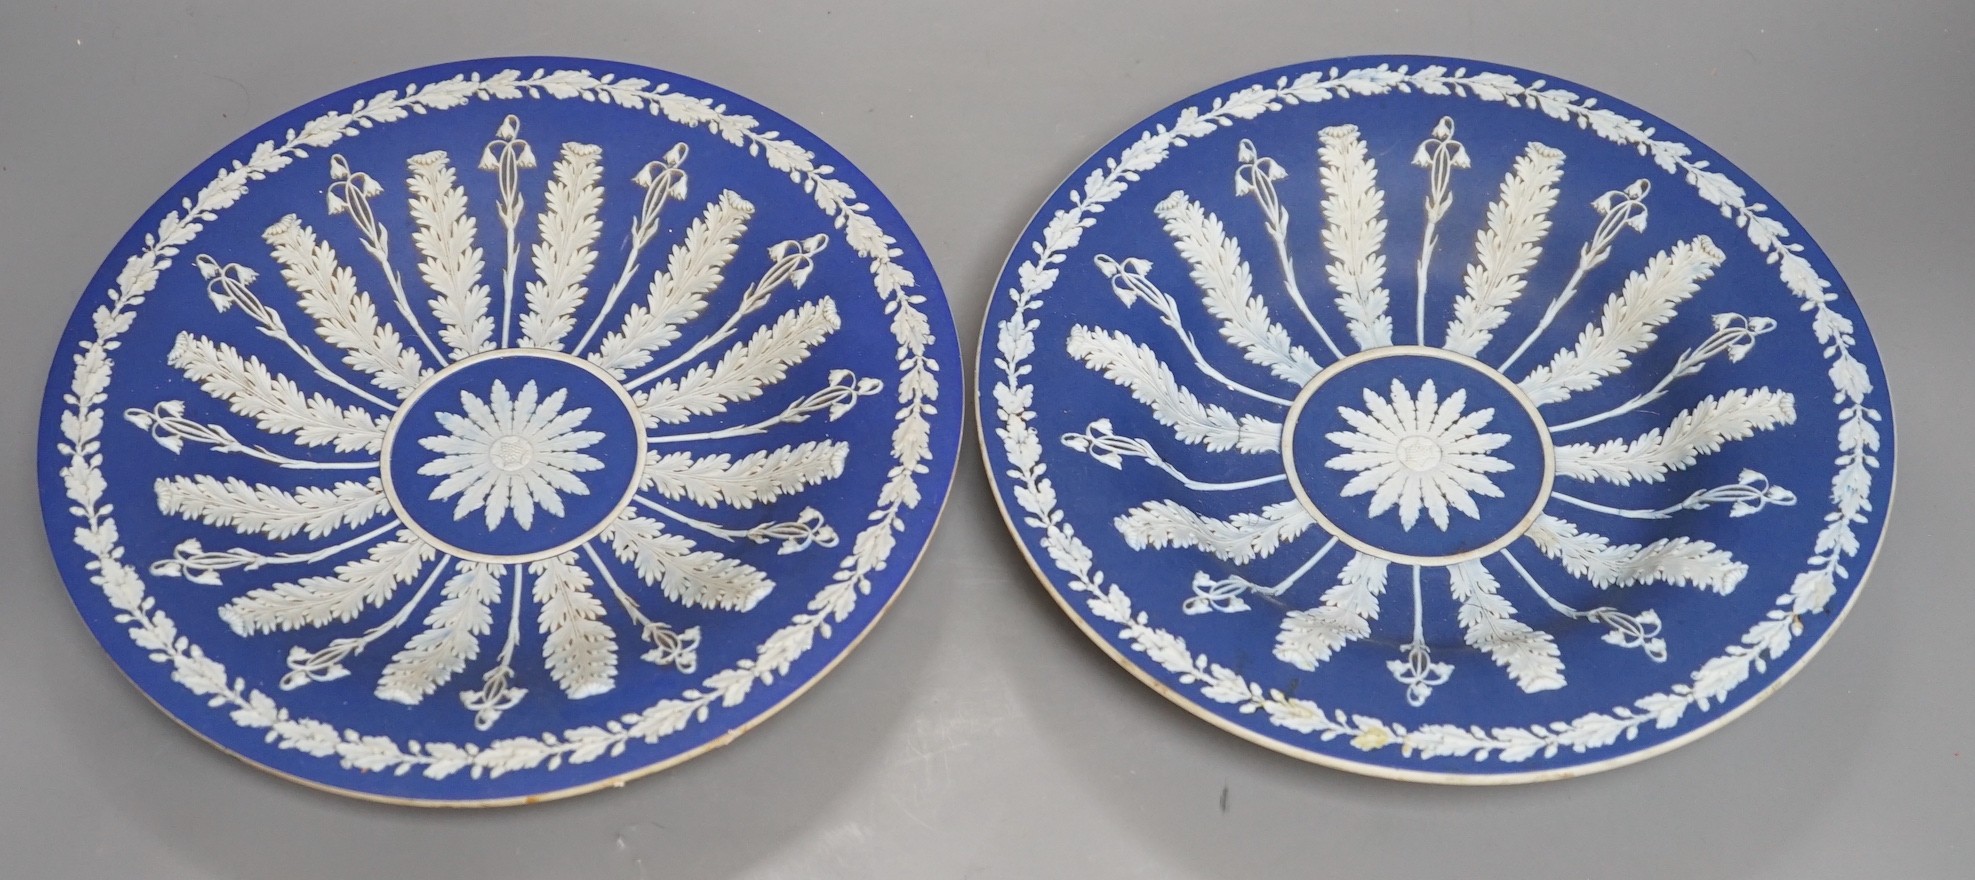 A pair of early 19th century Wedgwood jasper ware dishes, with radiating leaves from a central circle, 26cm